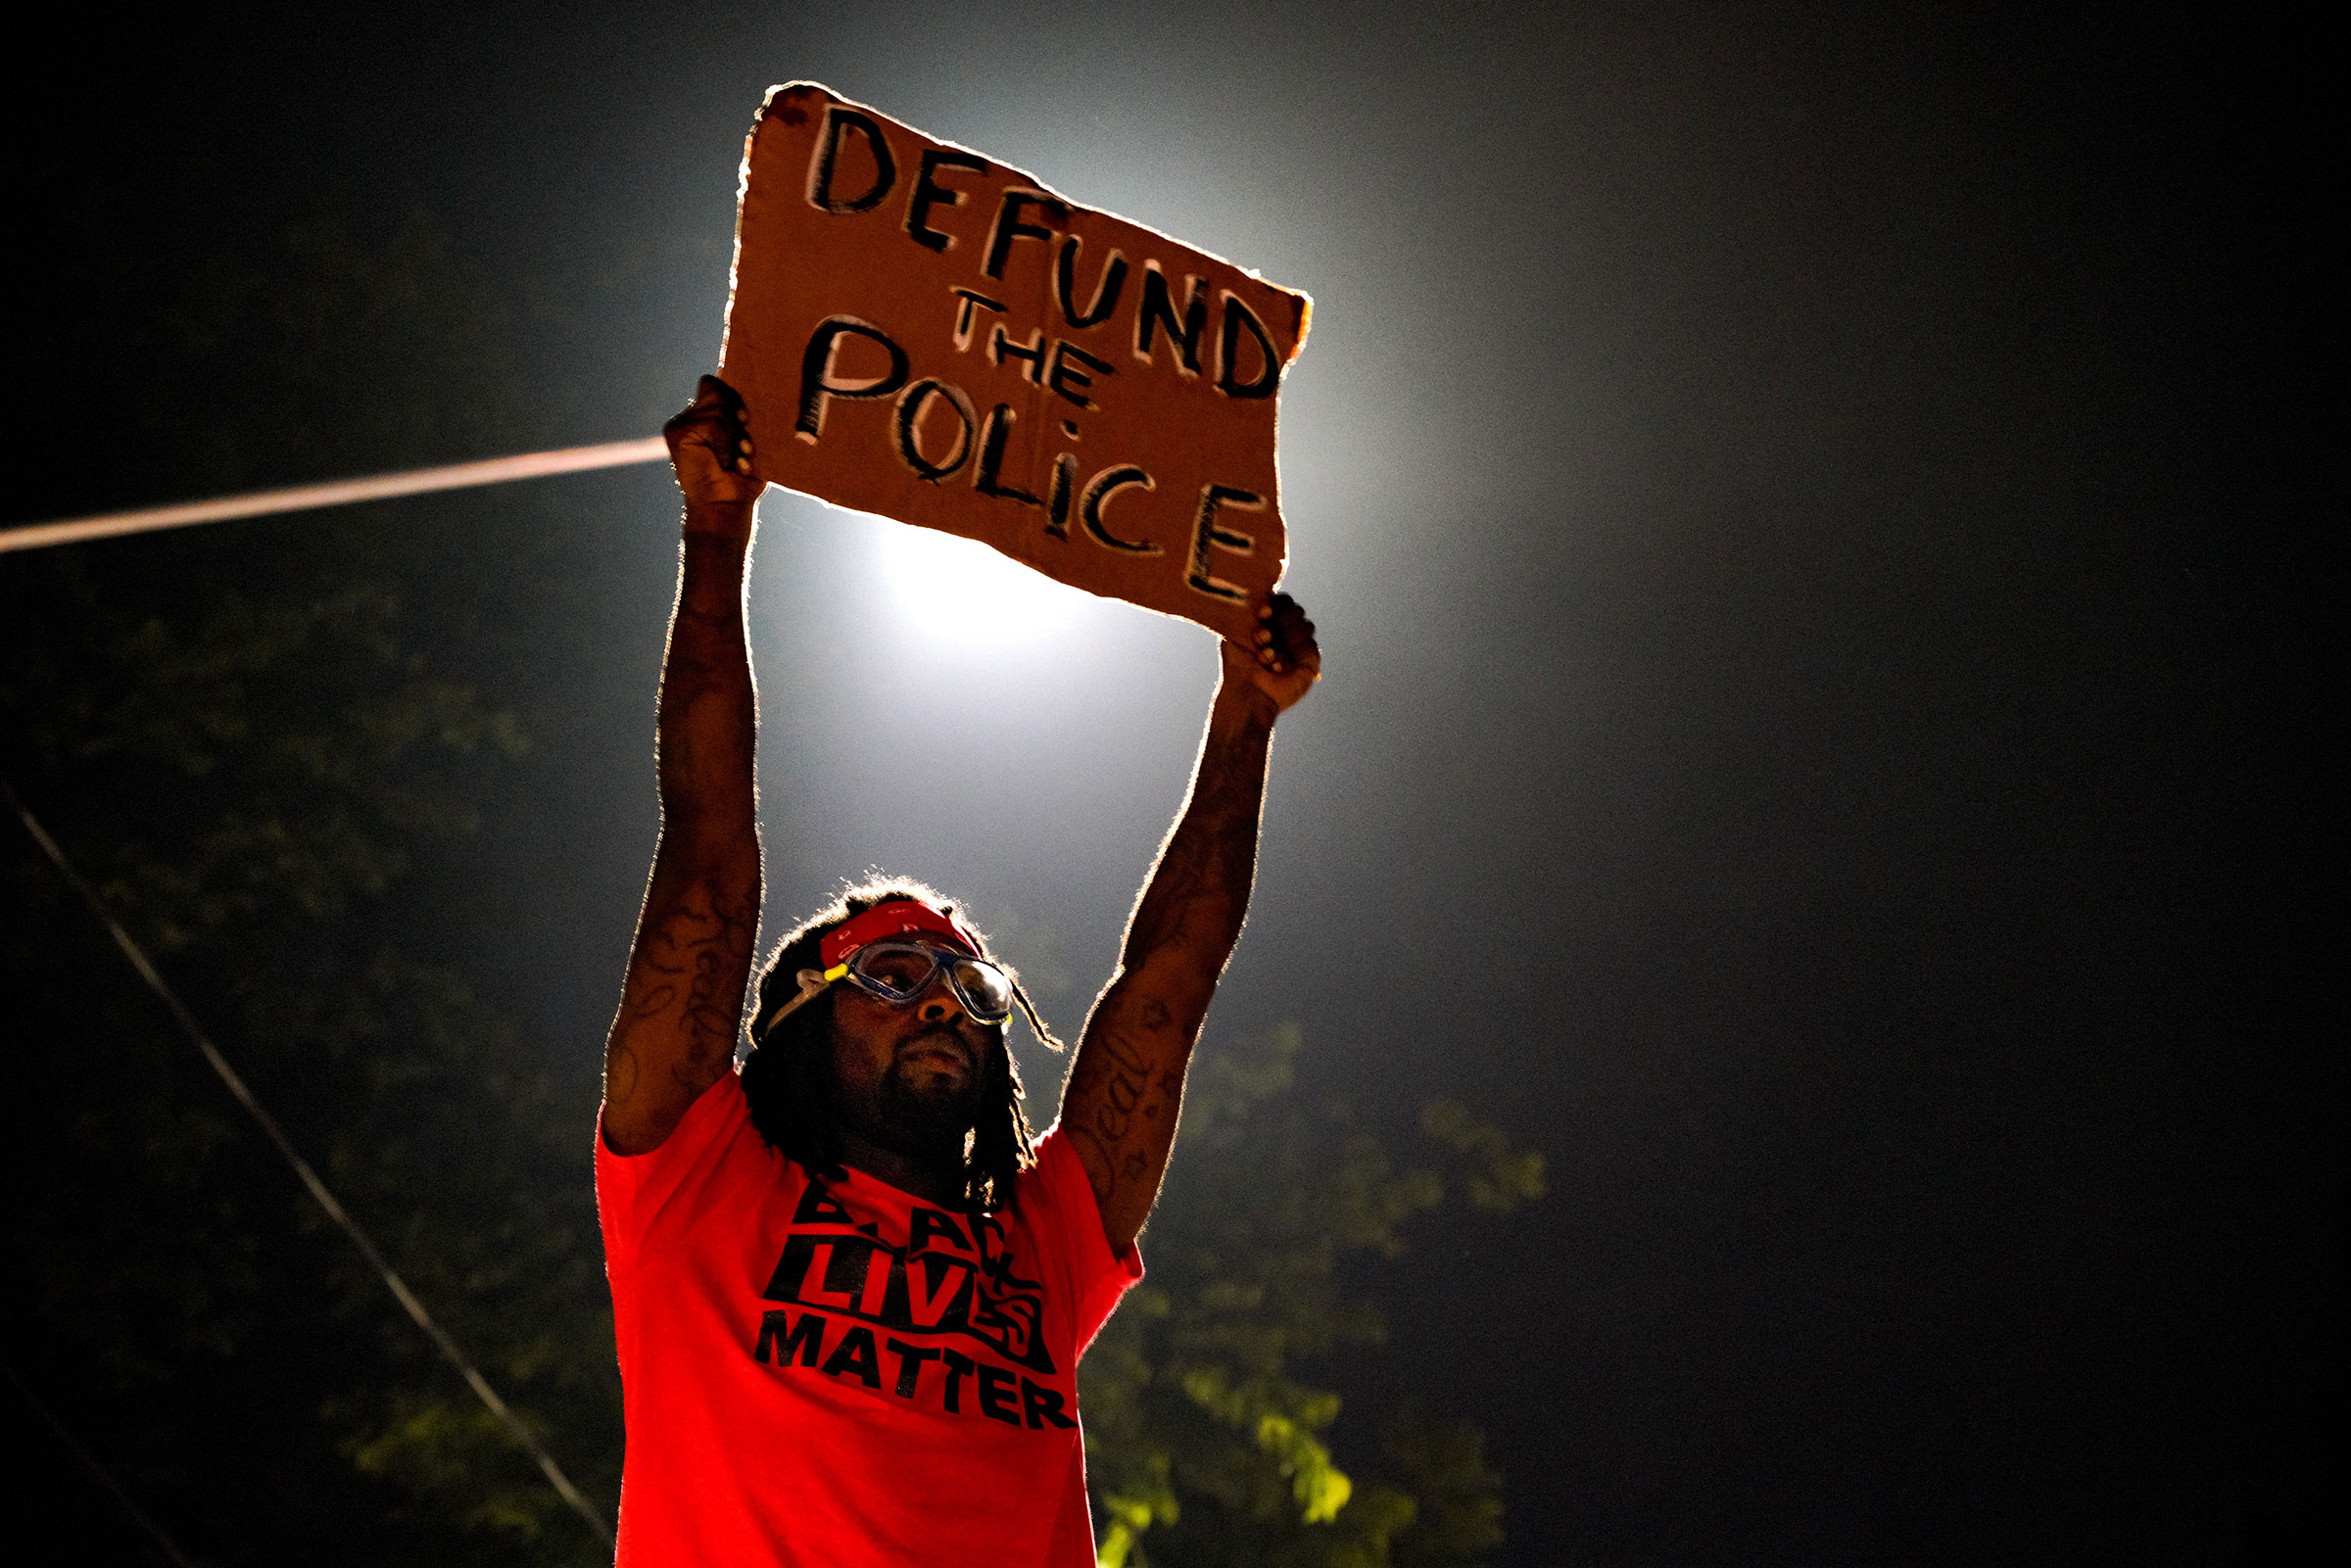 Demonstrators gather for a protest after an Atlanta police officer shot and killed Rayshard Brooks, 27, at a Wendy's fast food restaurant drive-thru in Atlanta, on June 14, 2020. (Ben Hendren—Anadolu Agency/Getty Images)